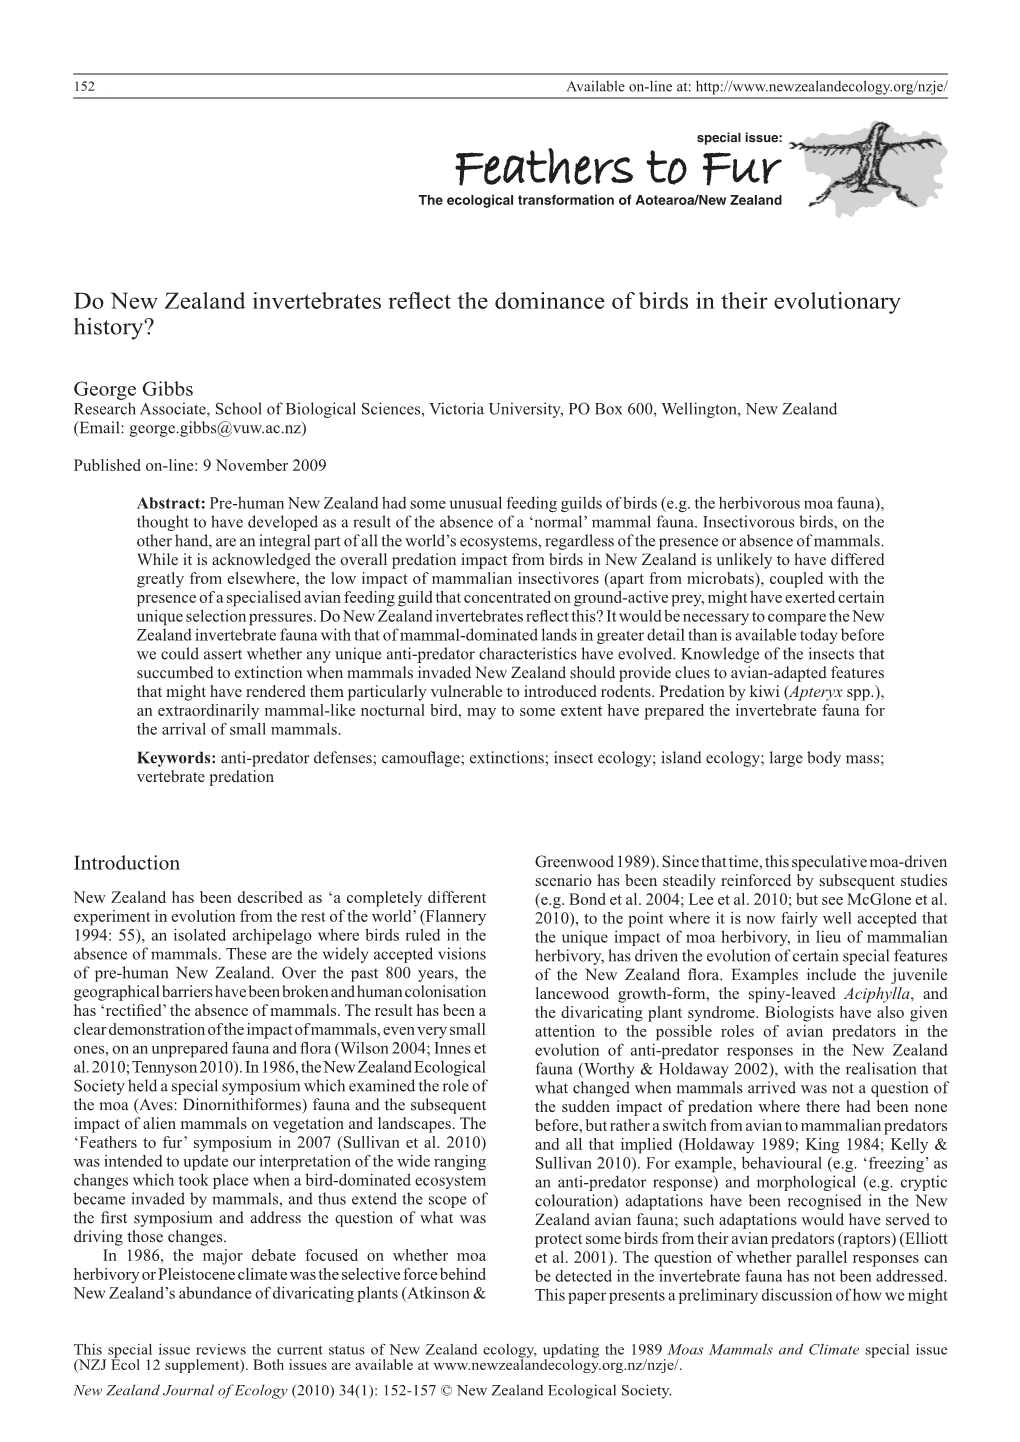 Feathers to Fur the Ecological Transformation of Aotearoa/New Zealand